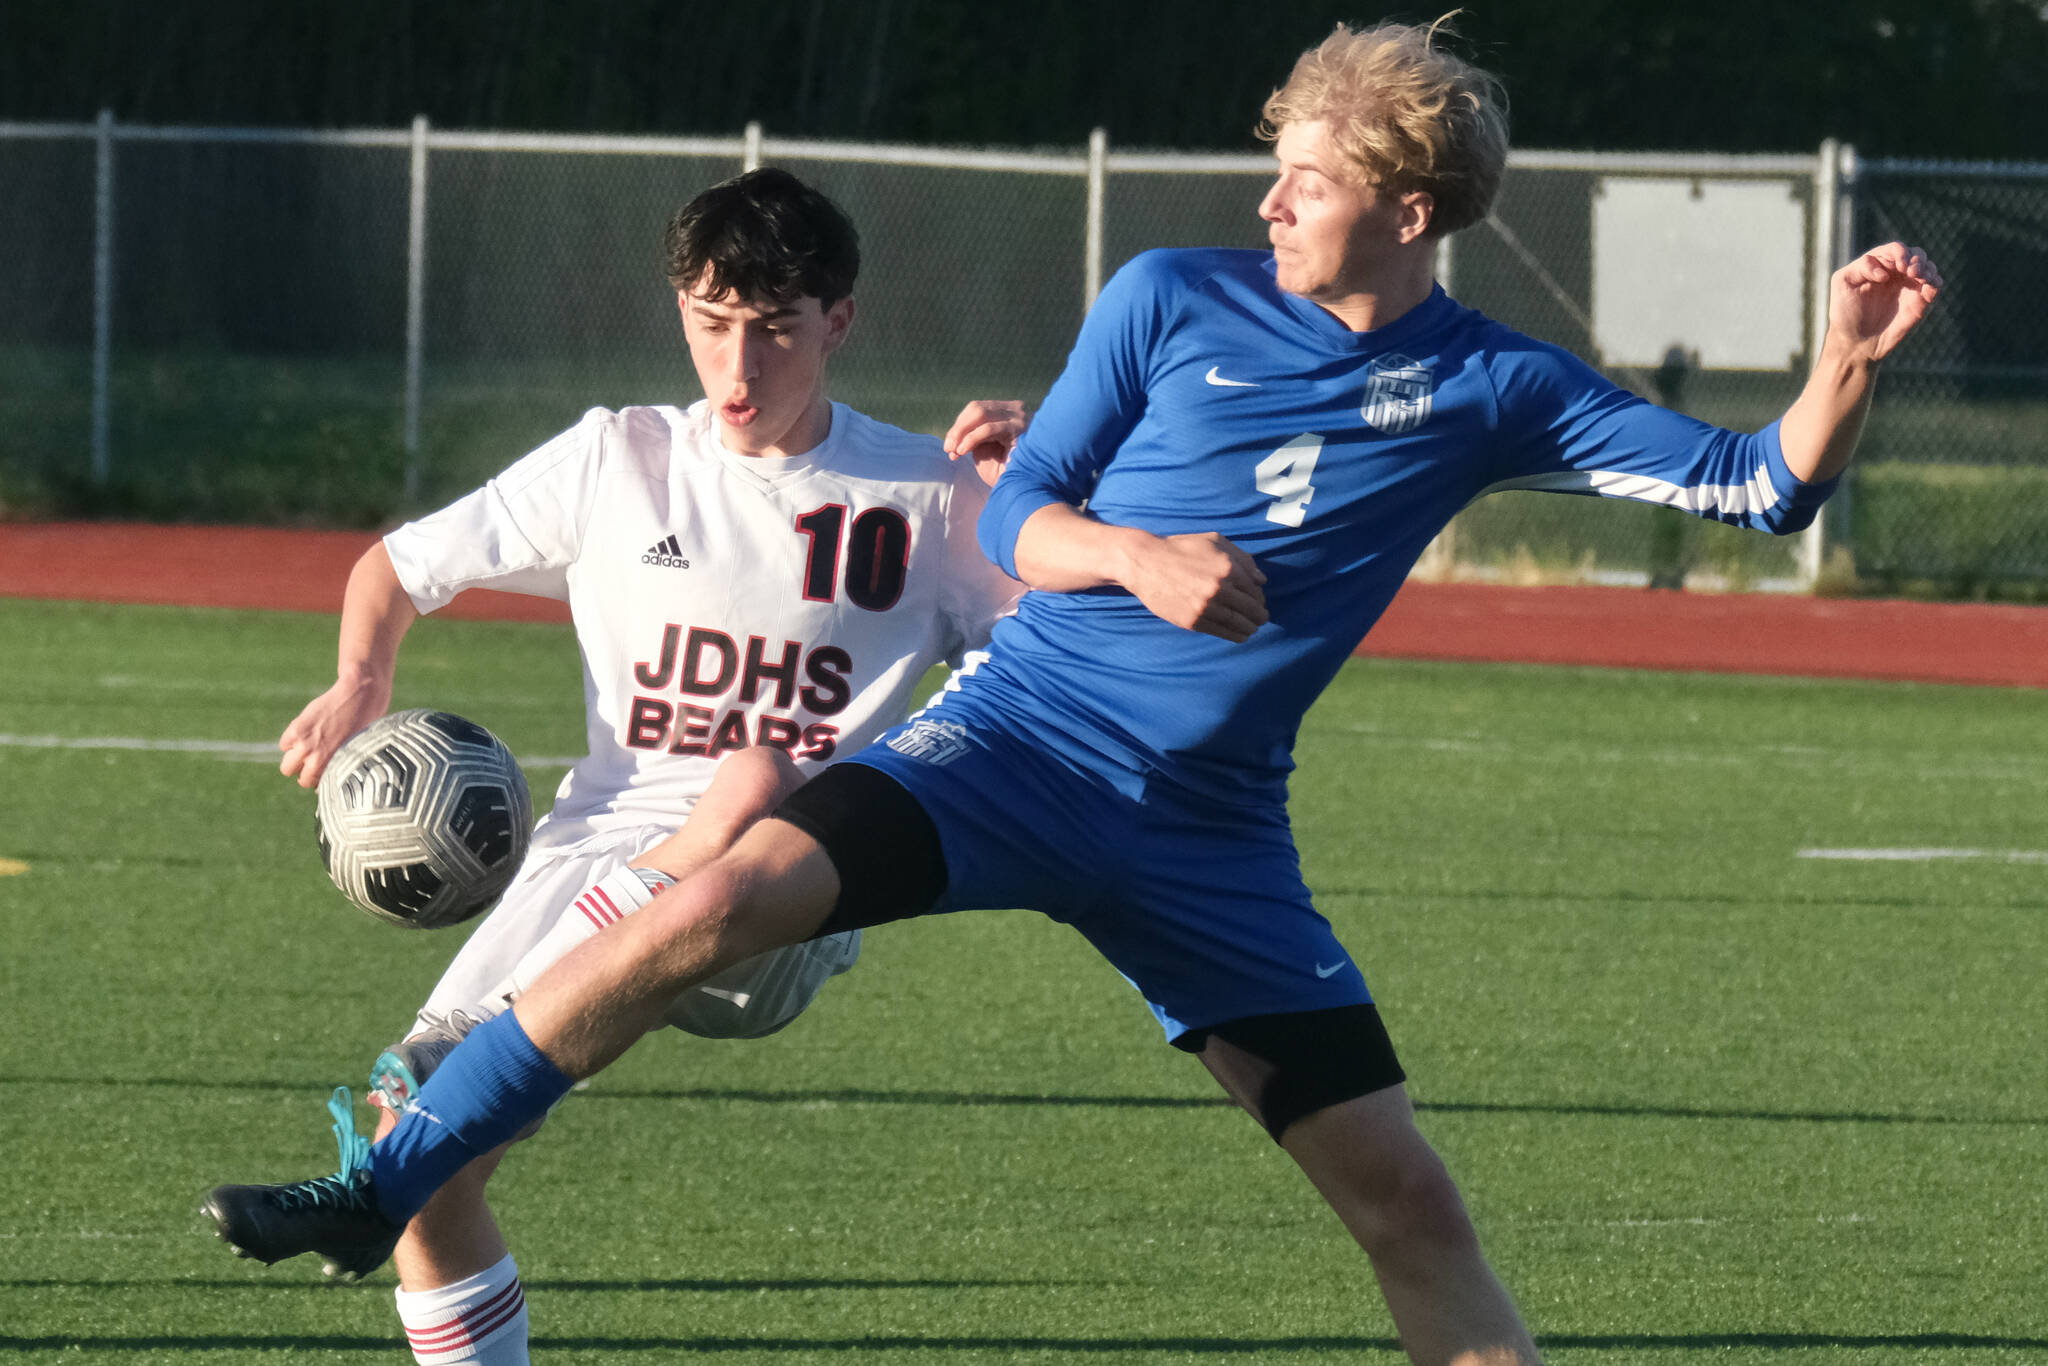 JDHS sophomore Kellen Chester (10) and TMHS senior Matthew Spratt (4) battle for a ball during the Crimson Bears 6-1 win over the Falcons Tuesday at Falcons Field. (Klas Stolpe / Juneau Empire)